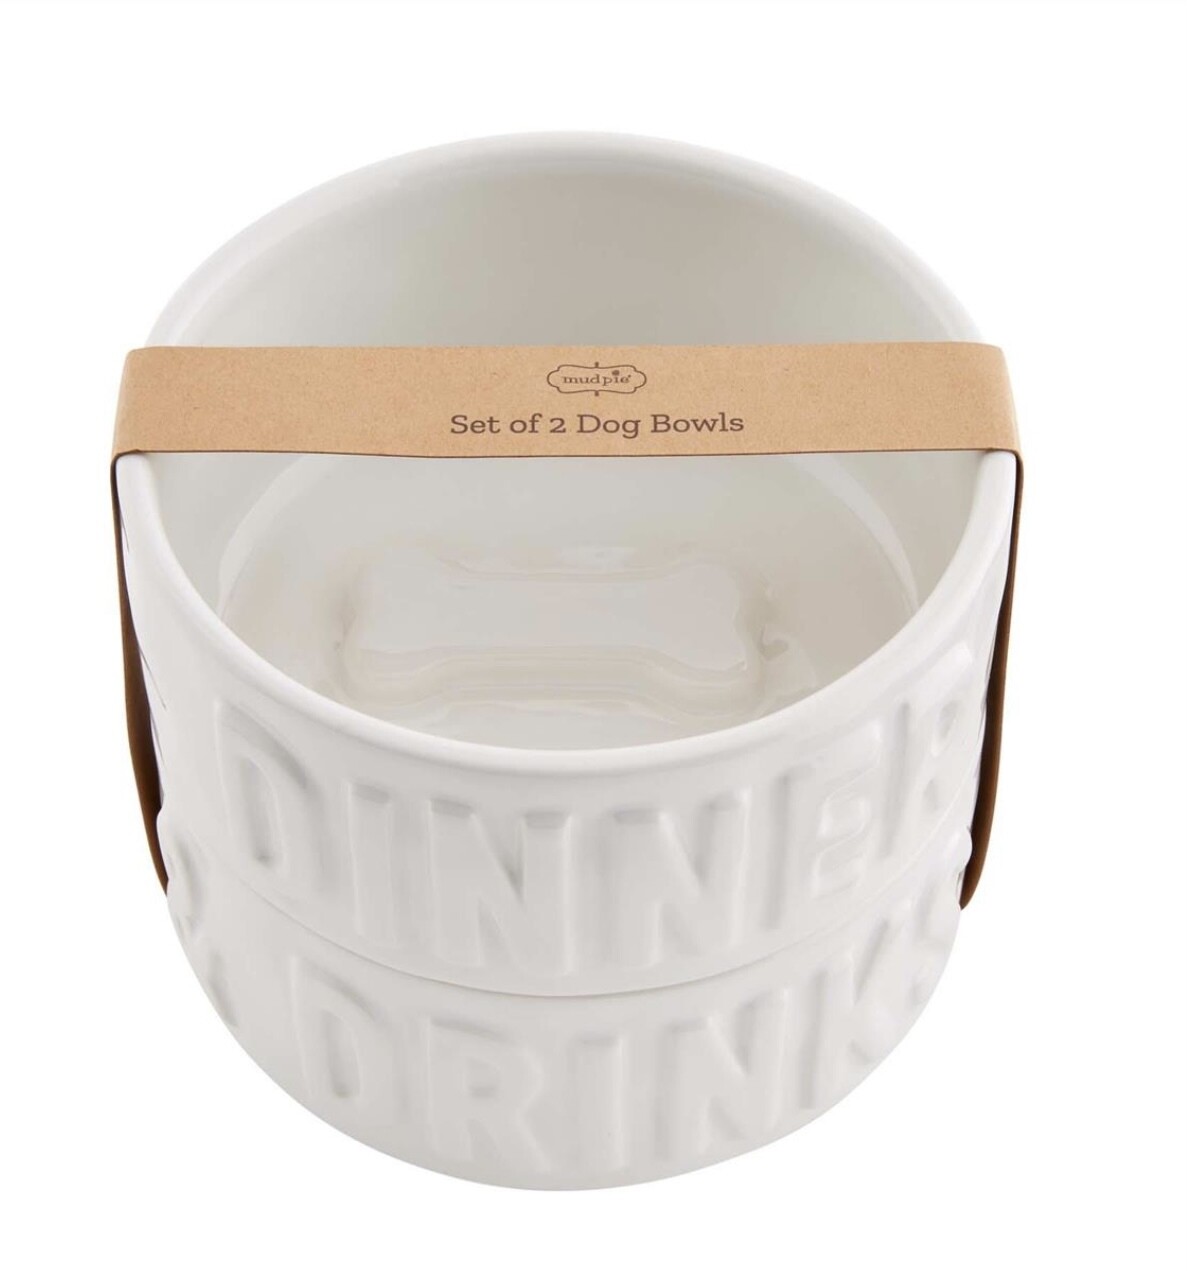 E-Dinner and Drinks Pet Bowls